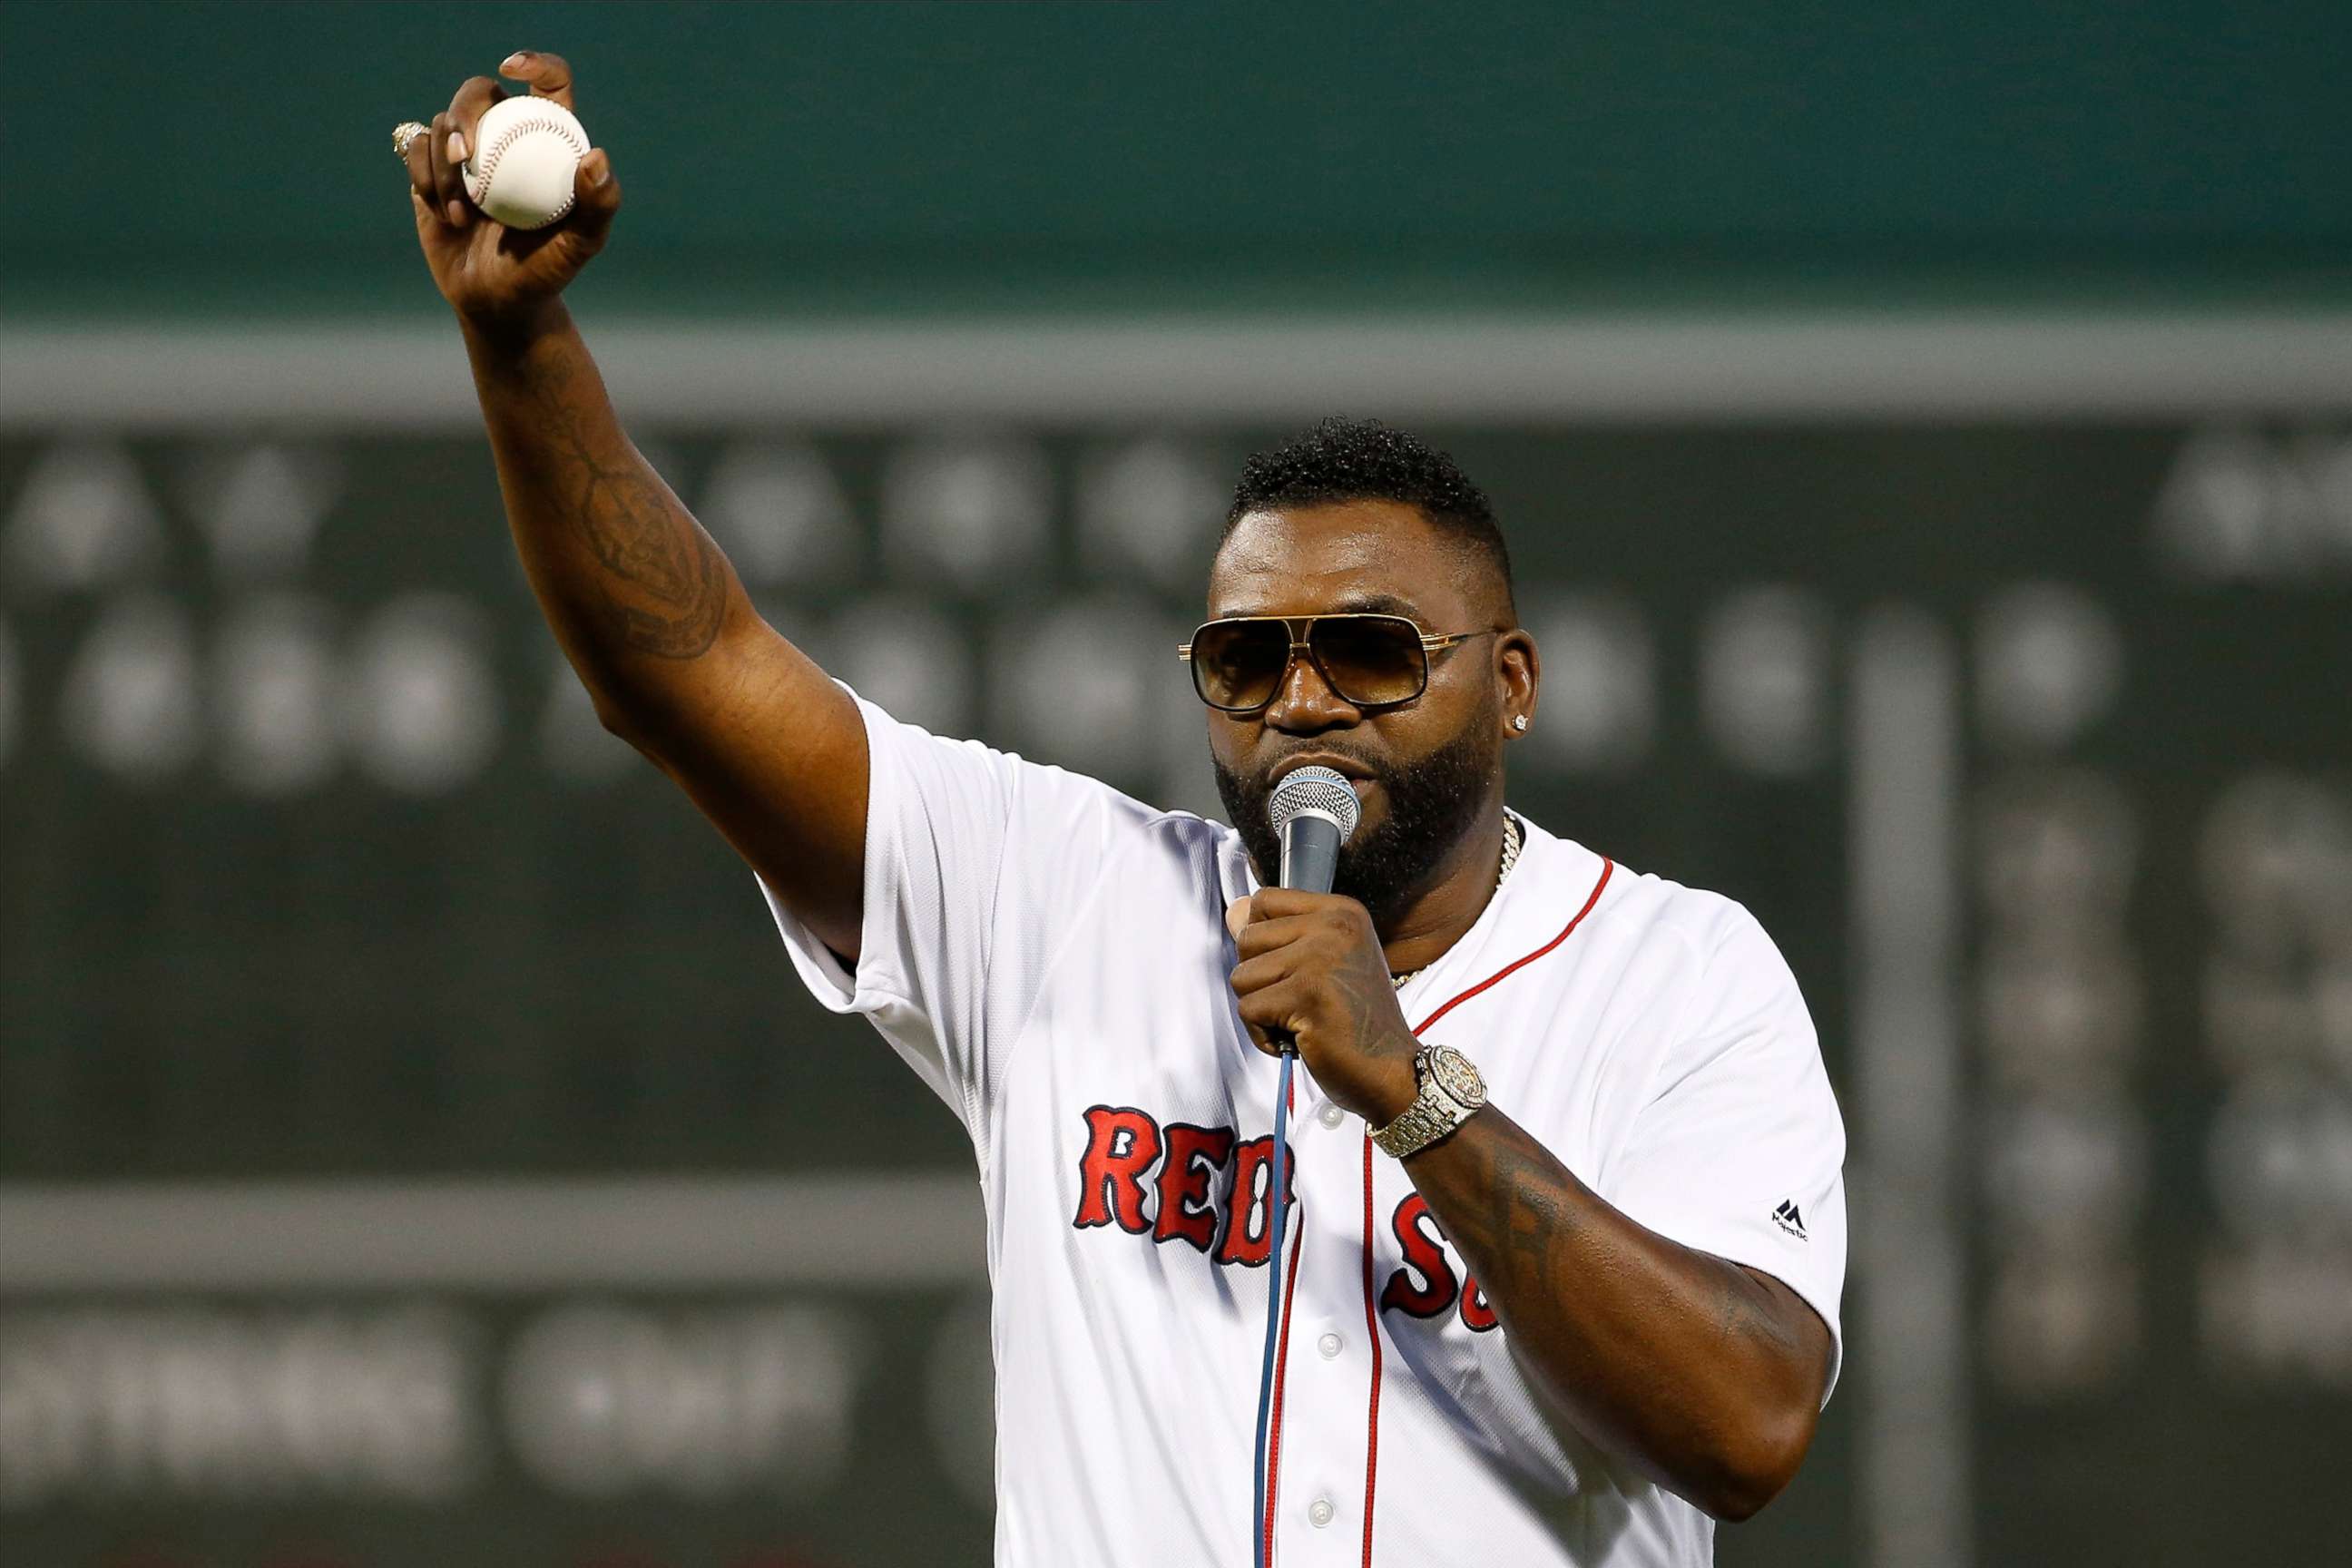 Ortiz among Boston fan favorites to throw out first pitch at Red Sox opener